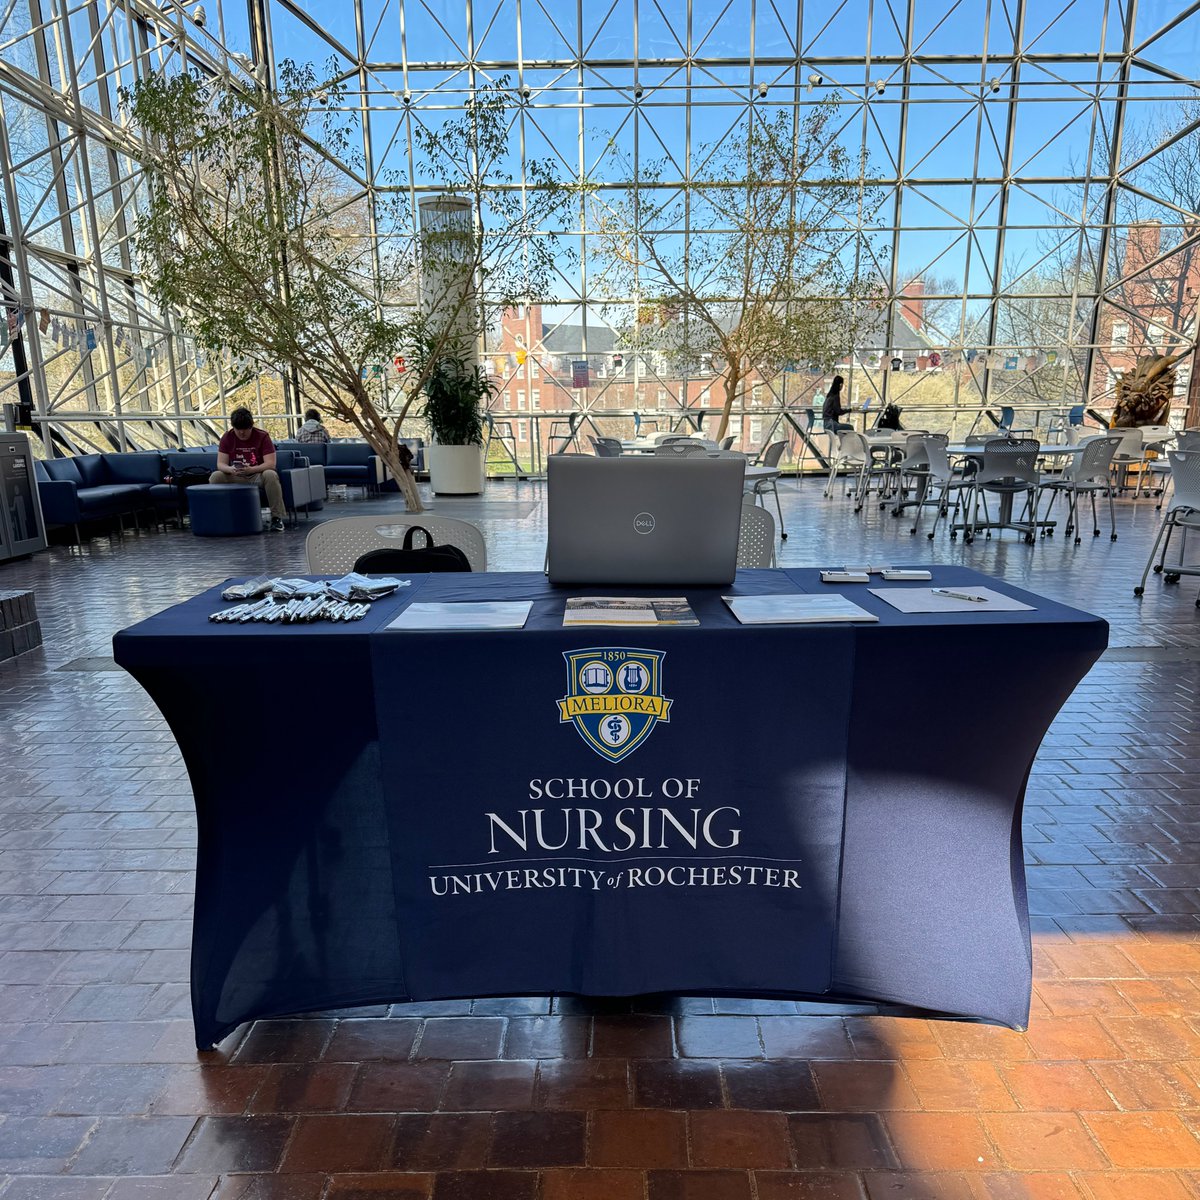 Our admissions team is at @UofR's Wilson Commons today until 1 p.m.! 👋🐝 Stop by and chat about career pathways and opportunities at the School of Nursing with us. @WilsonCommonsUR